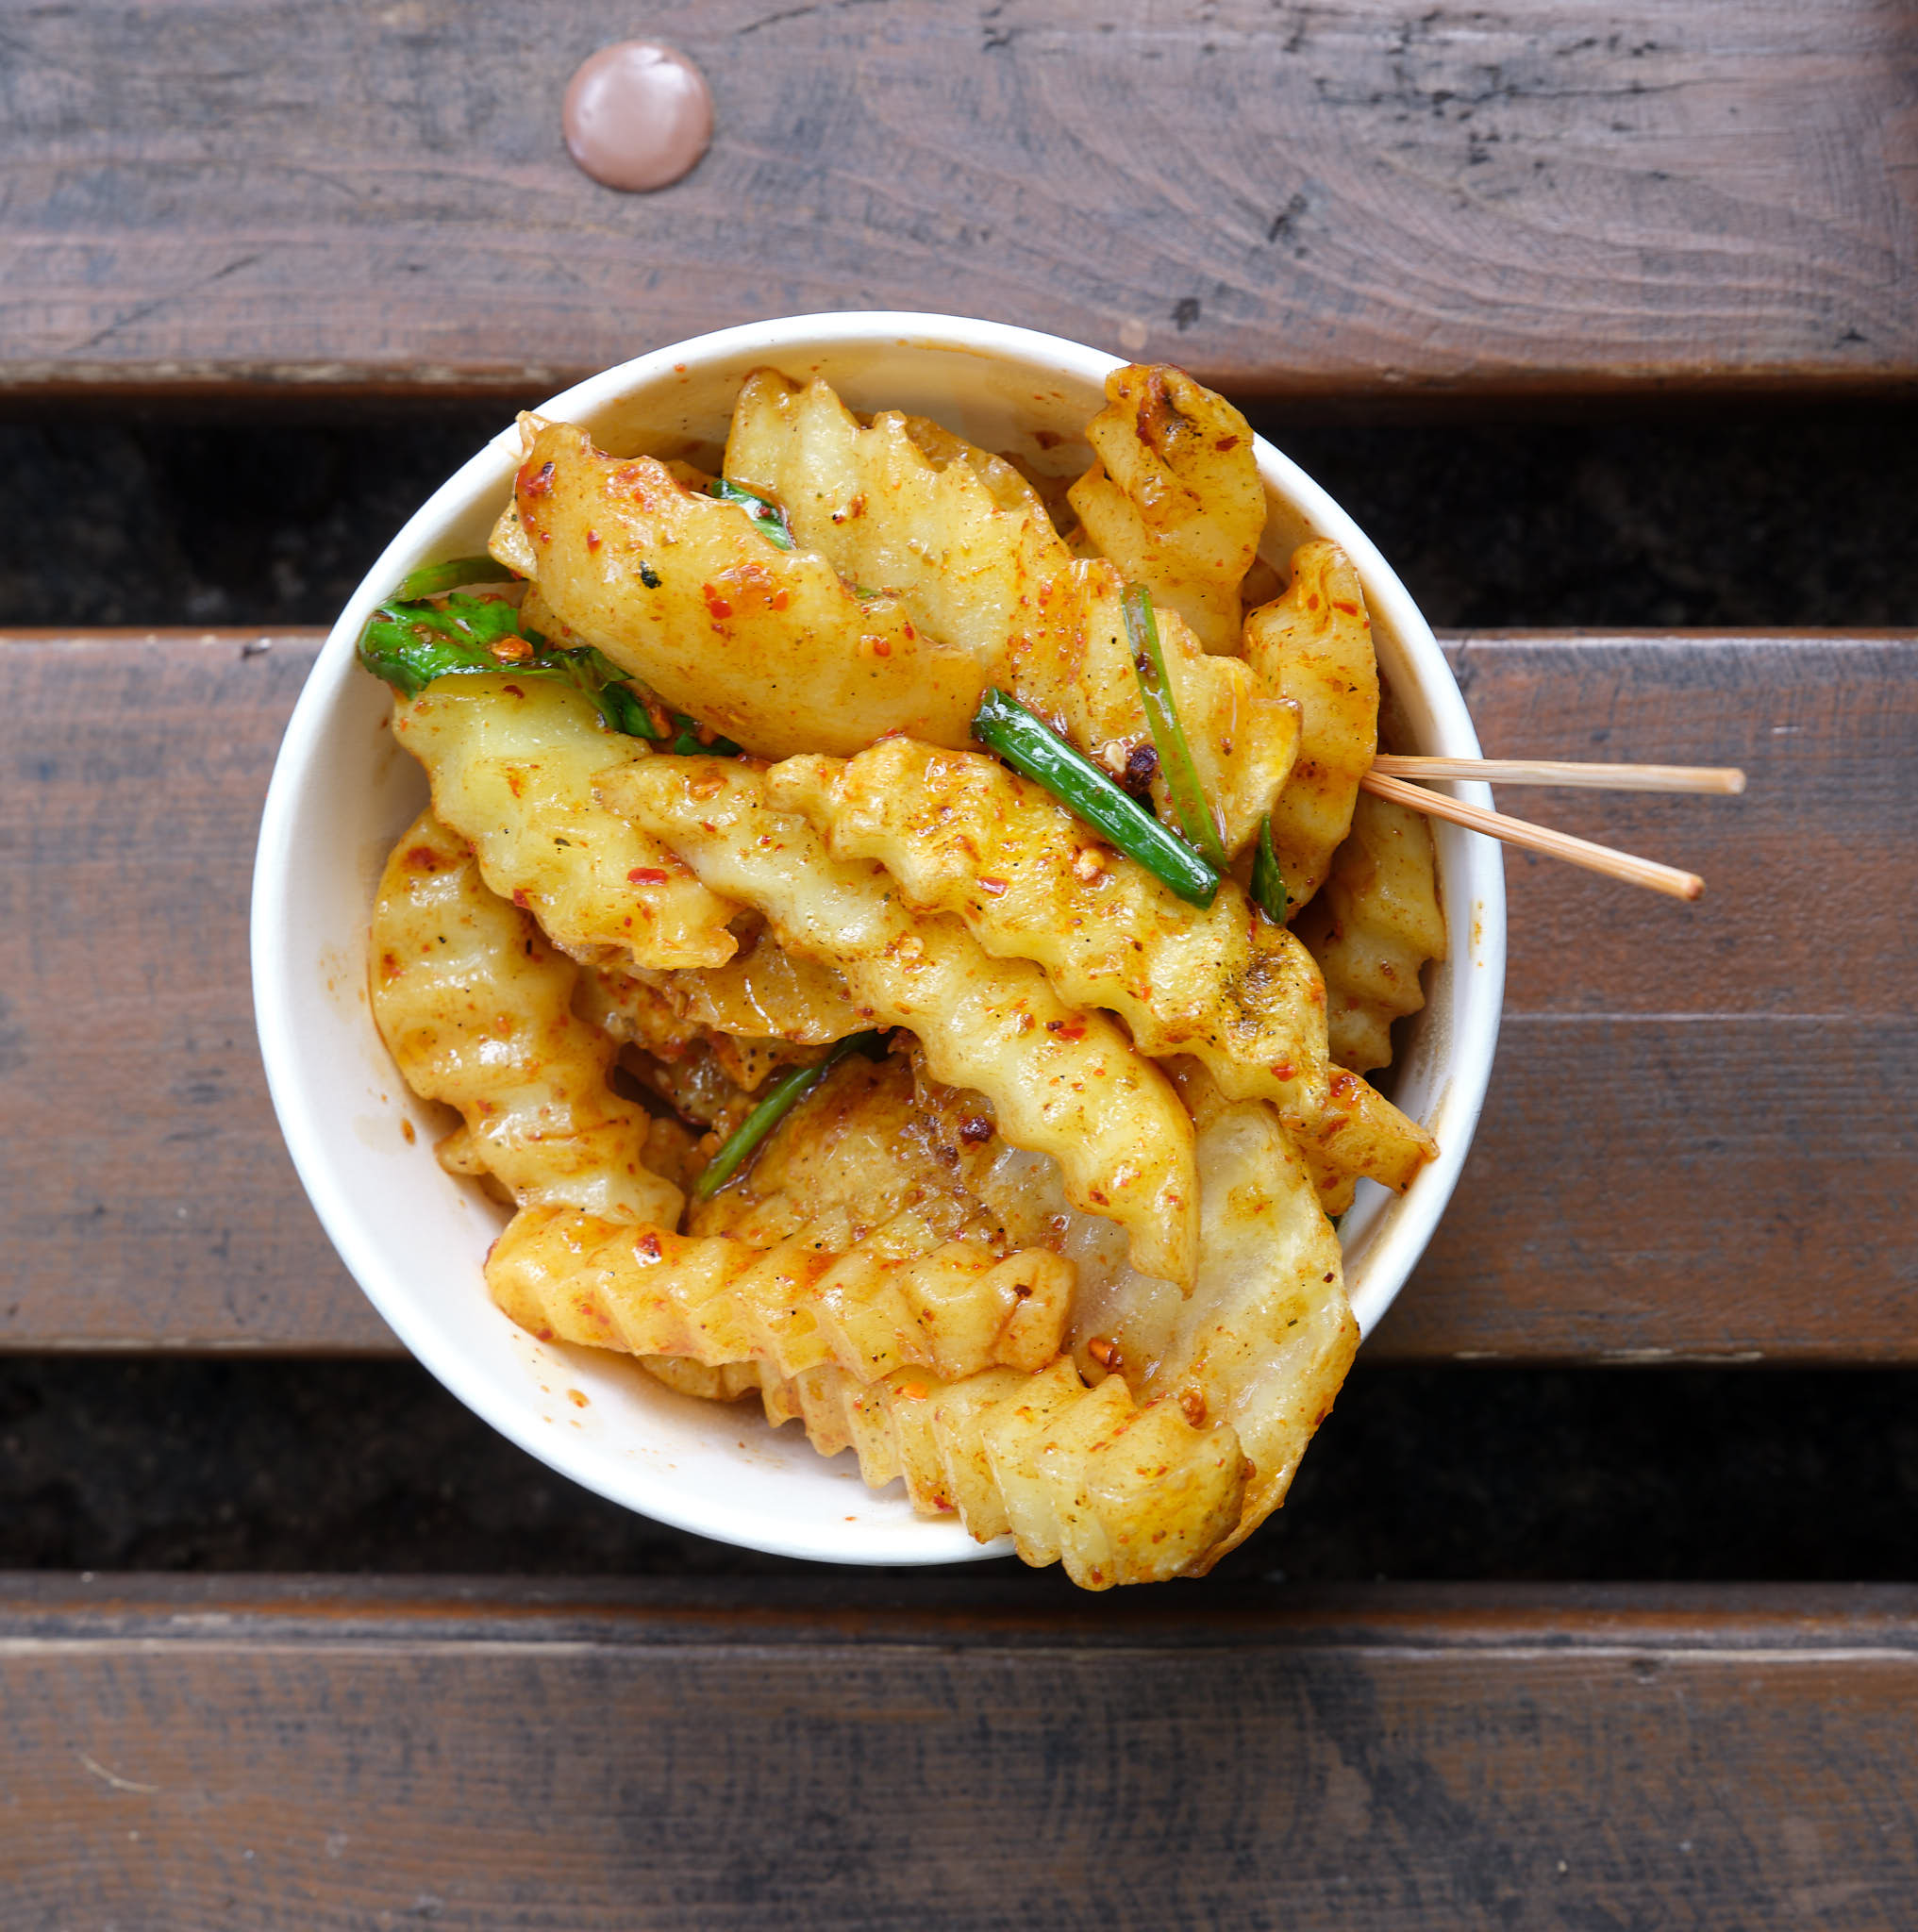 Spicy fries with cumin and coriander on the streets of Shuanglang